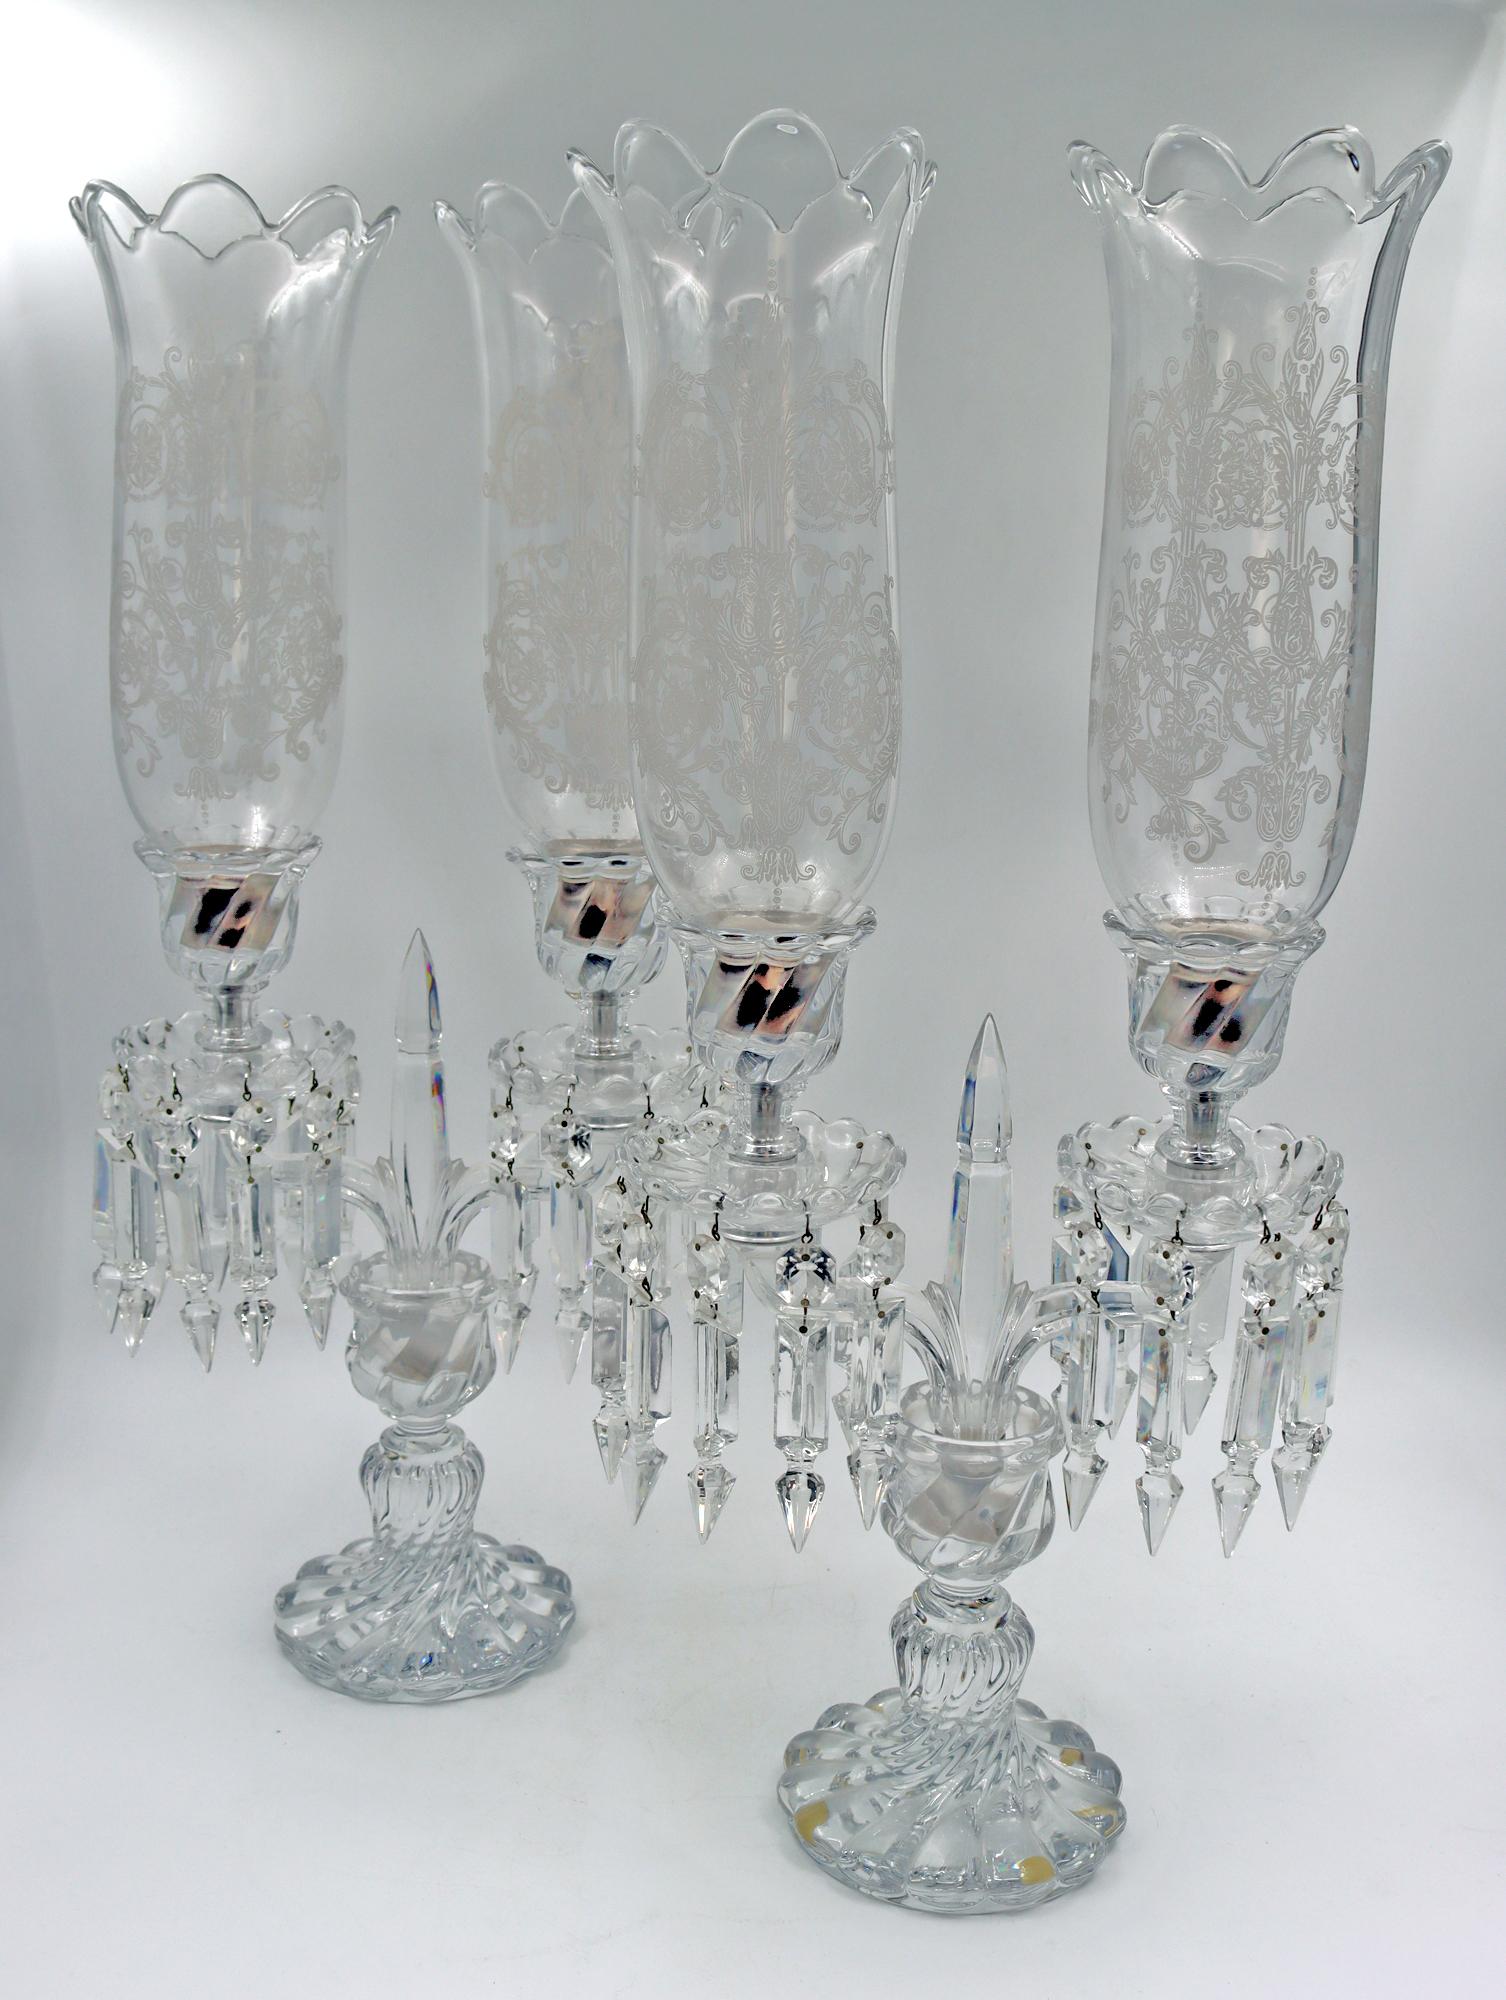 Pair of Candelabras Signed Baccarat, 19th Century 1